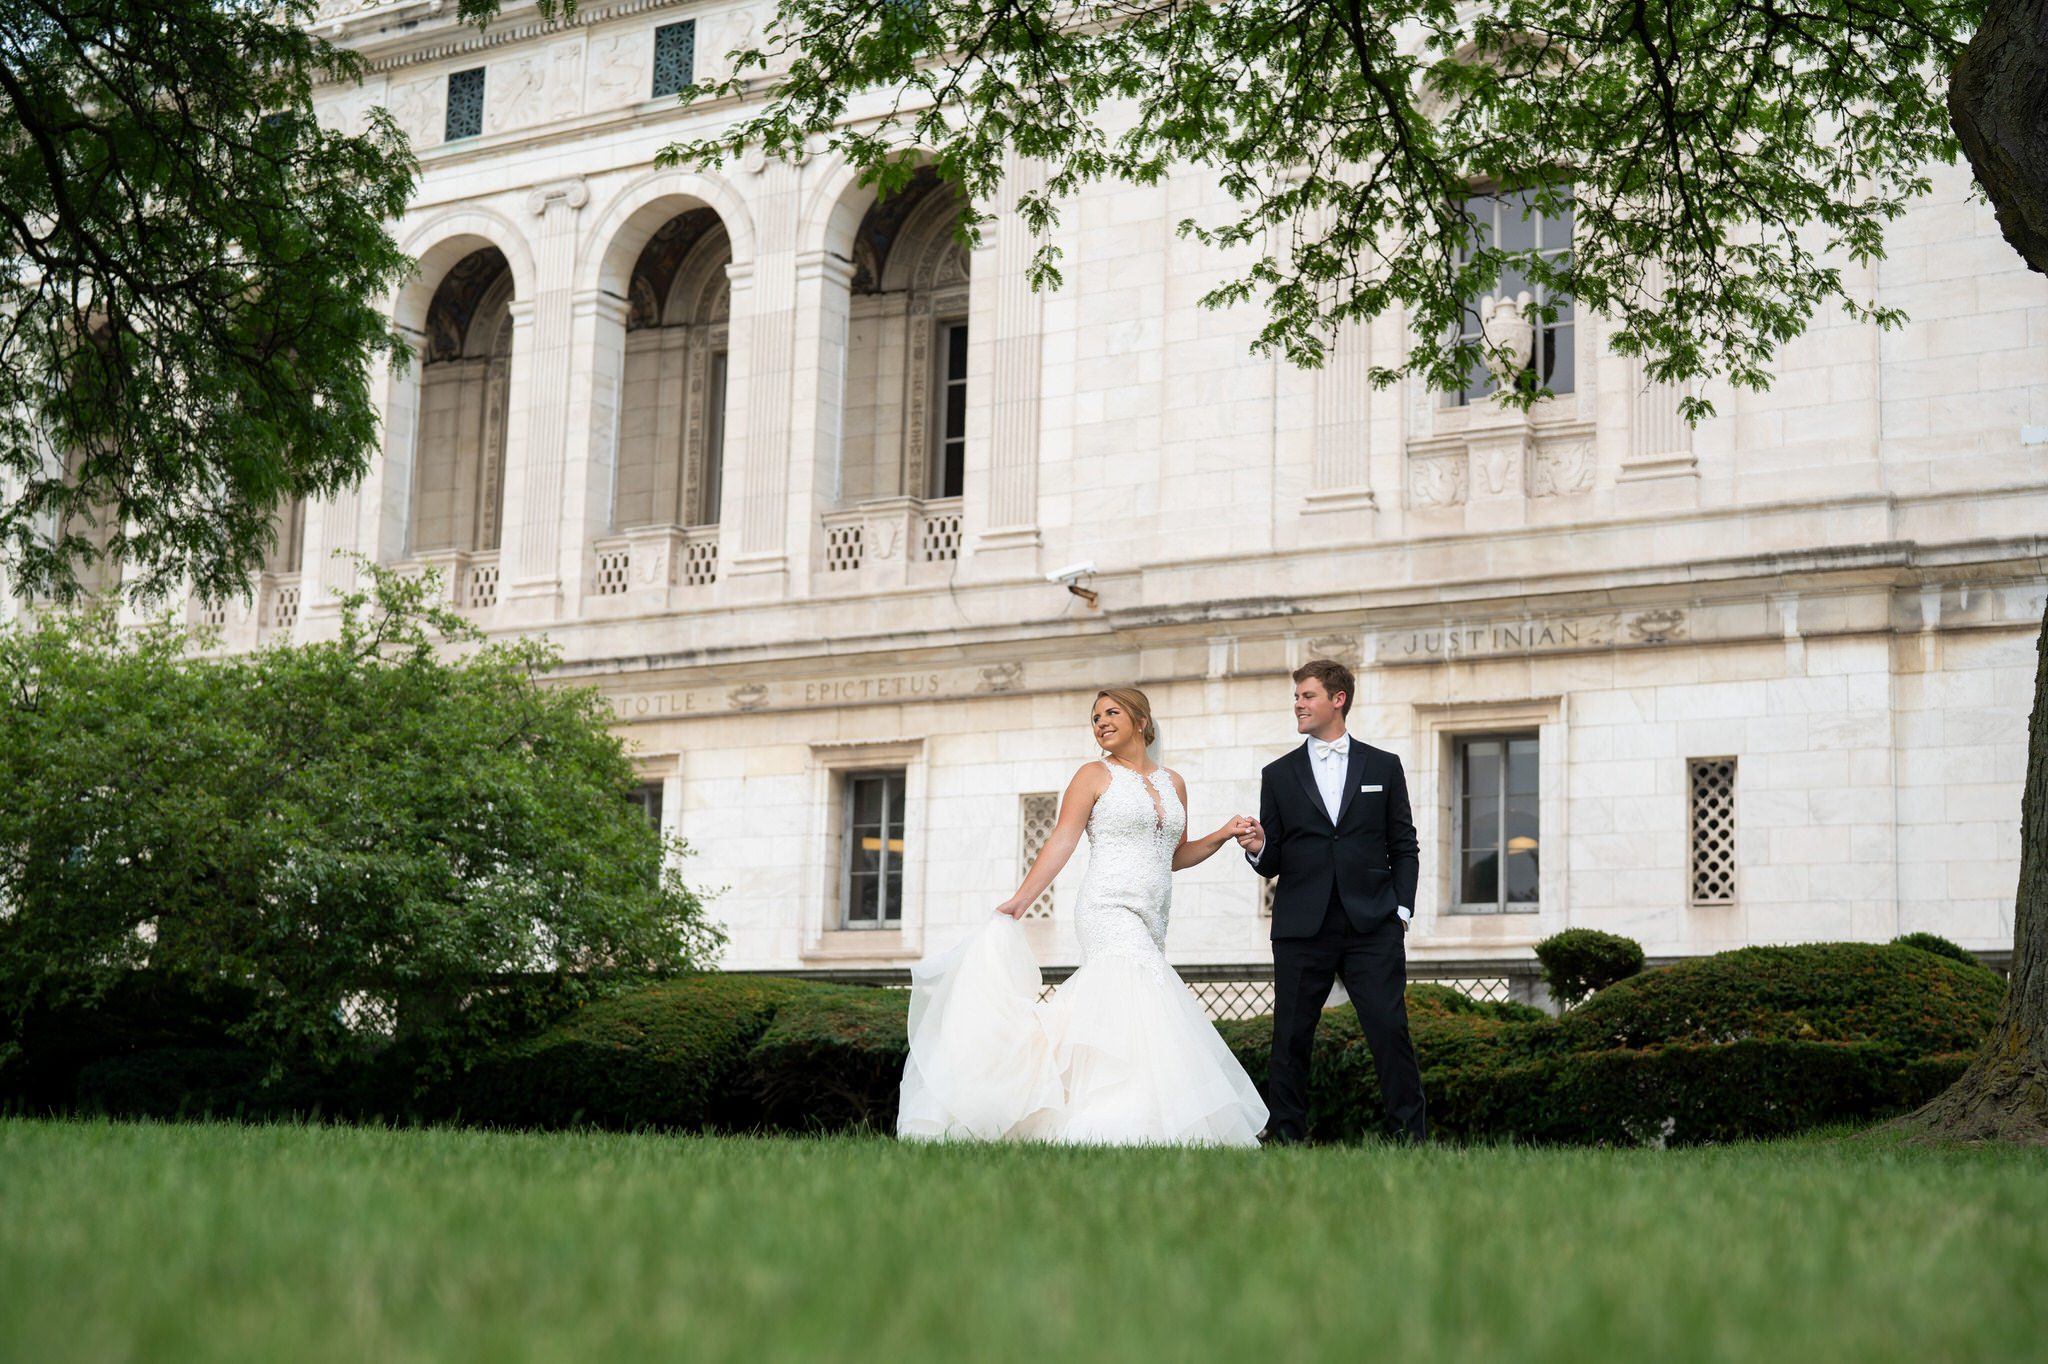 Newlyweds walk holding hands on the front lawn of the Detroit Public Library on their wedding day.  